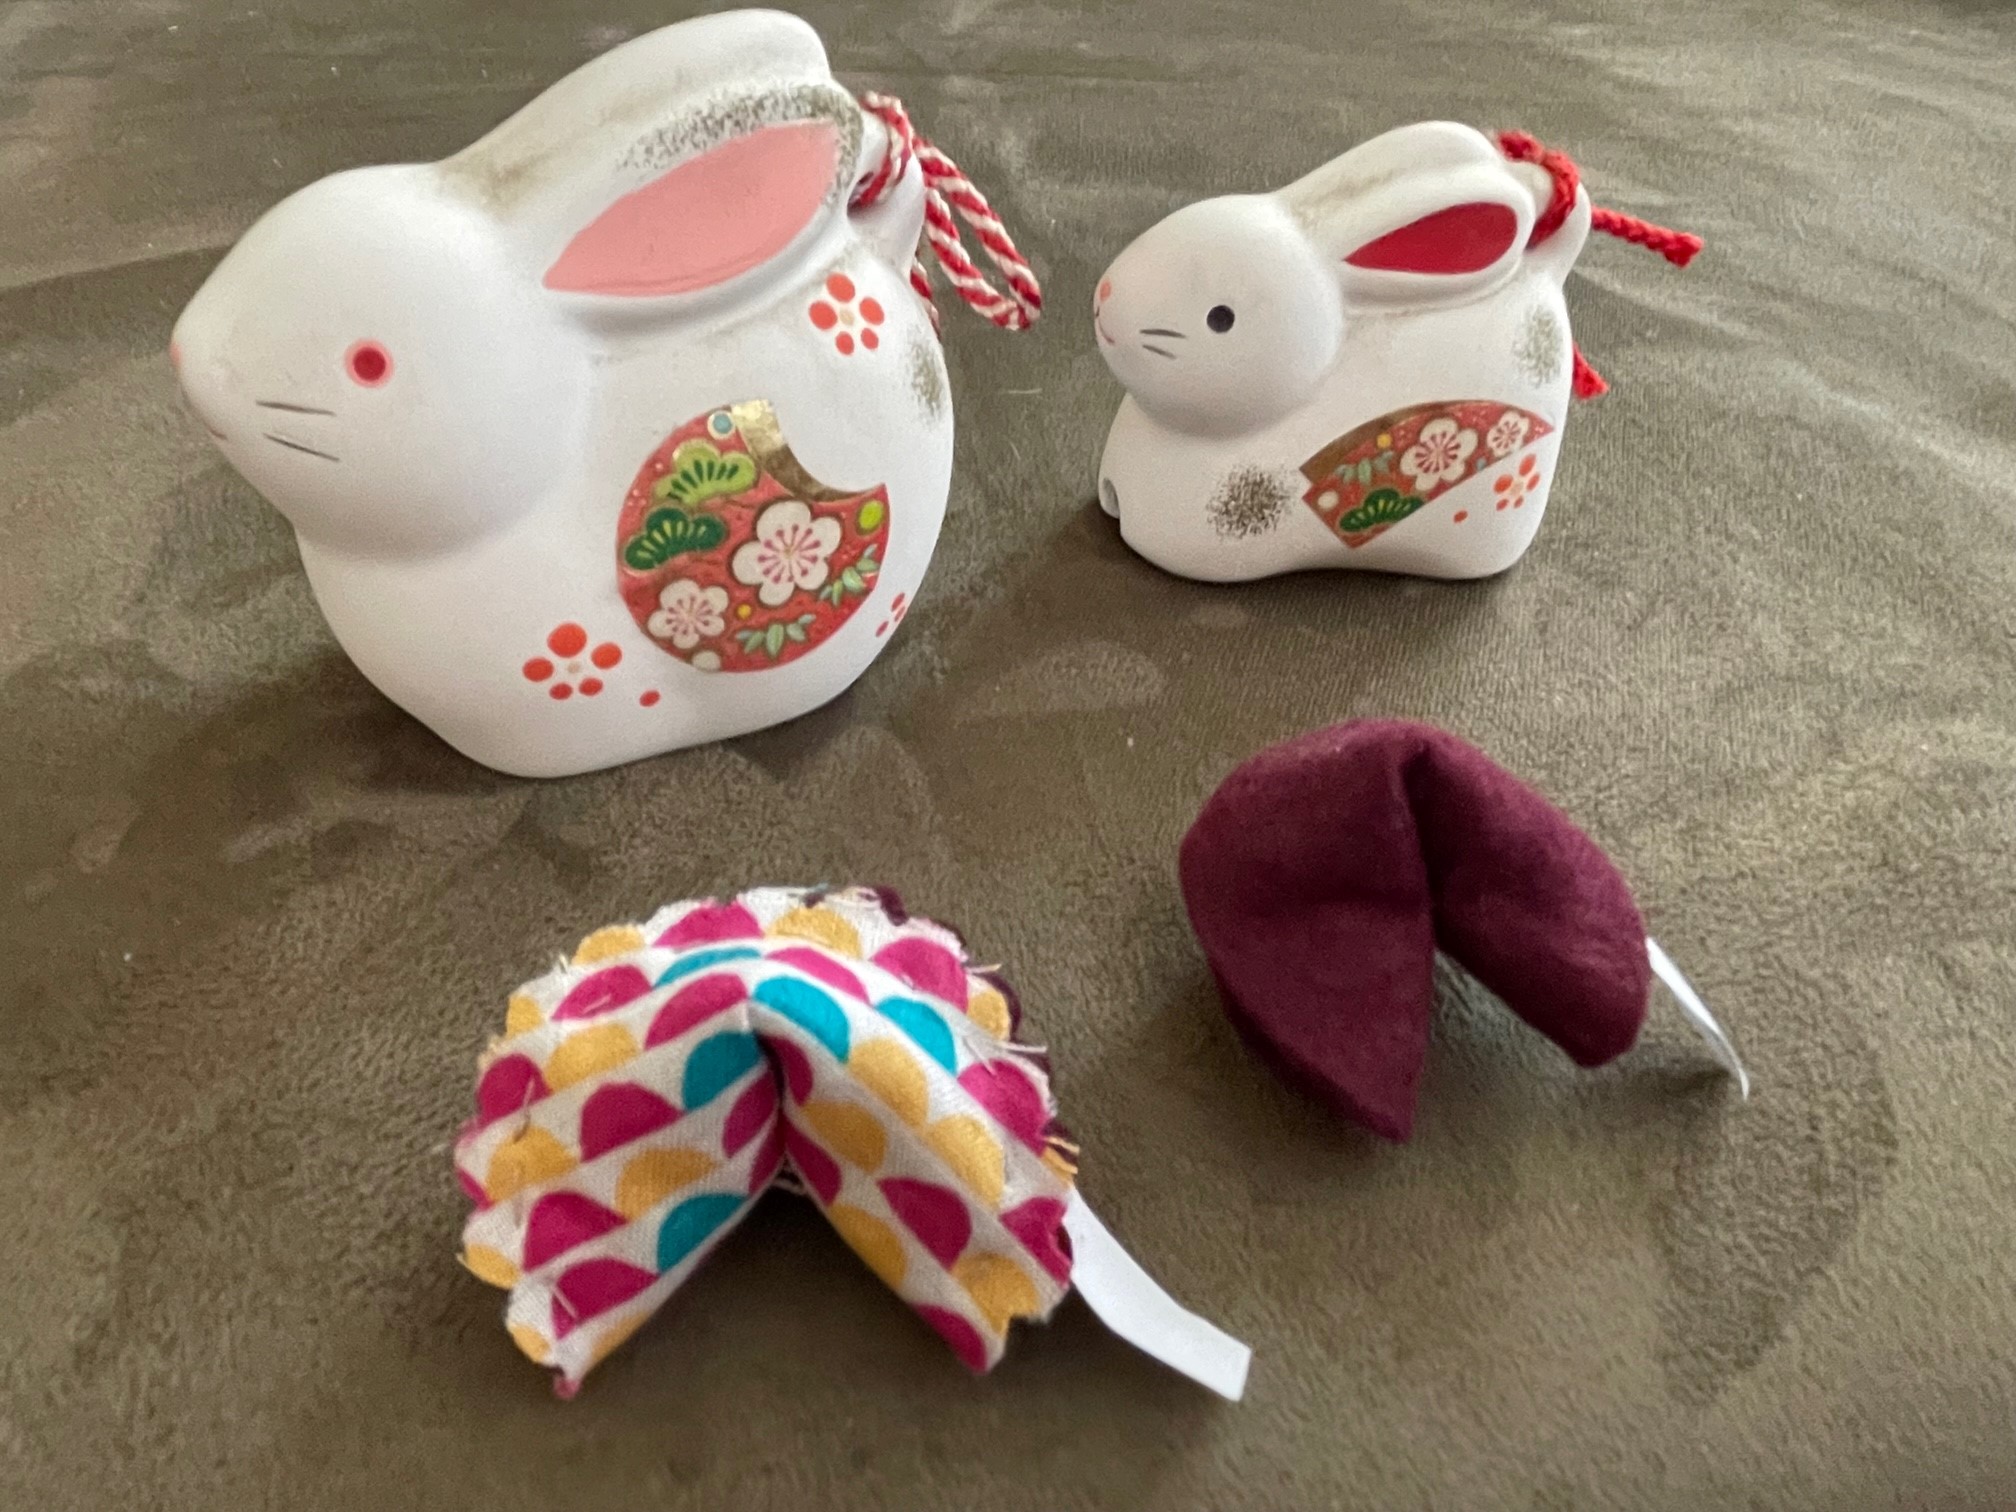 2 fortune cookies made out of fabric, in front of 2 ceramic rabbits